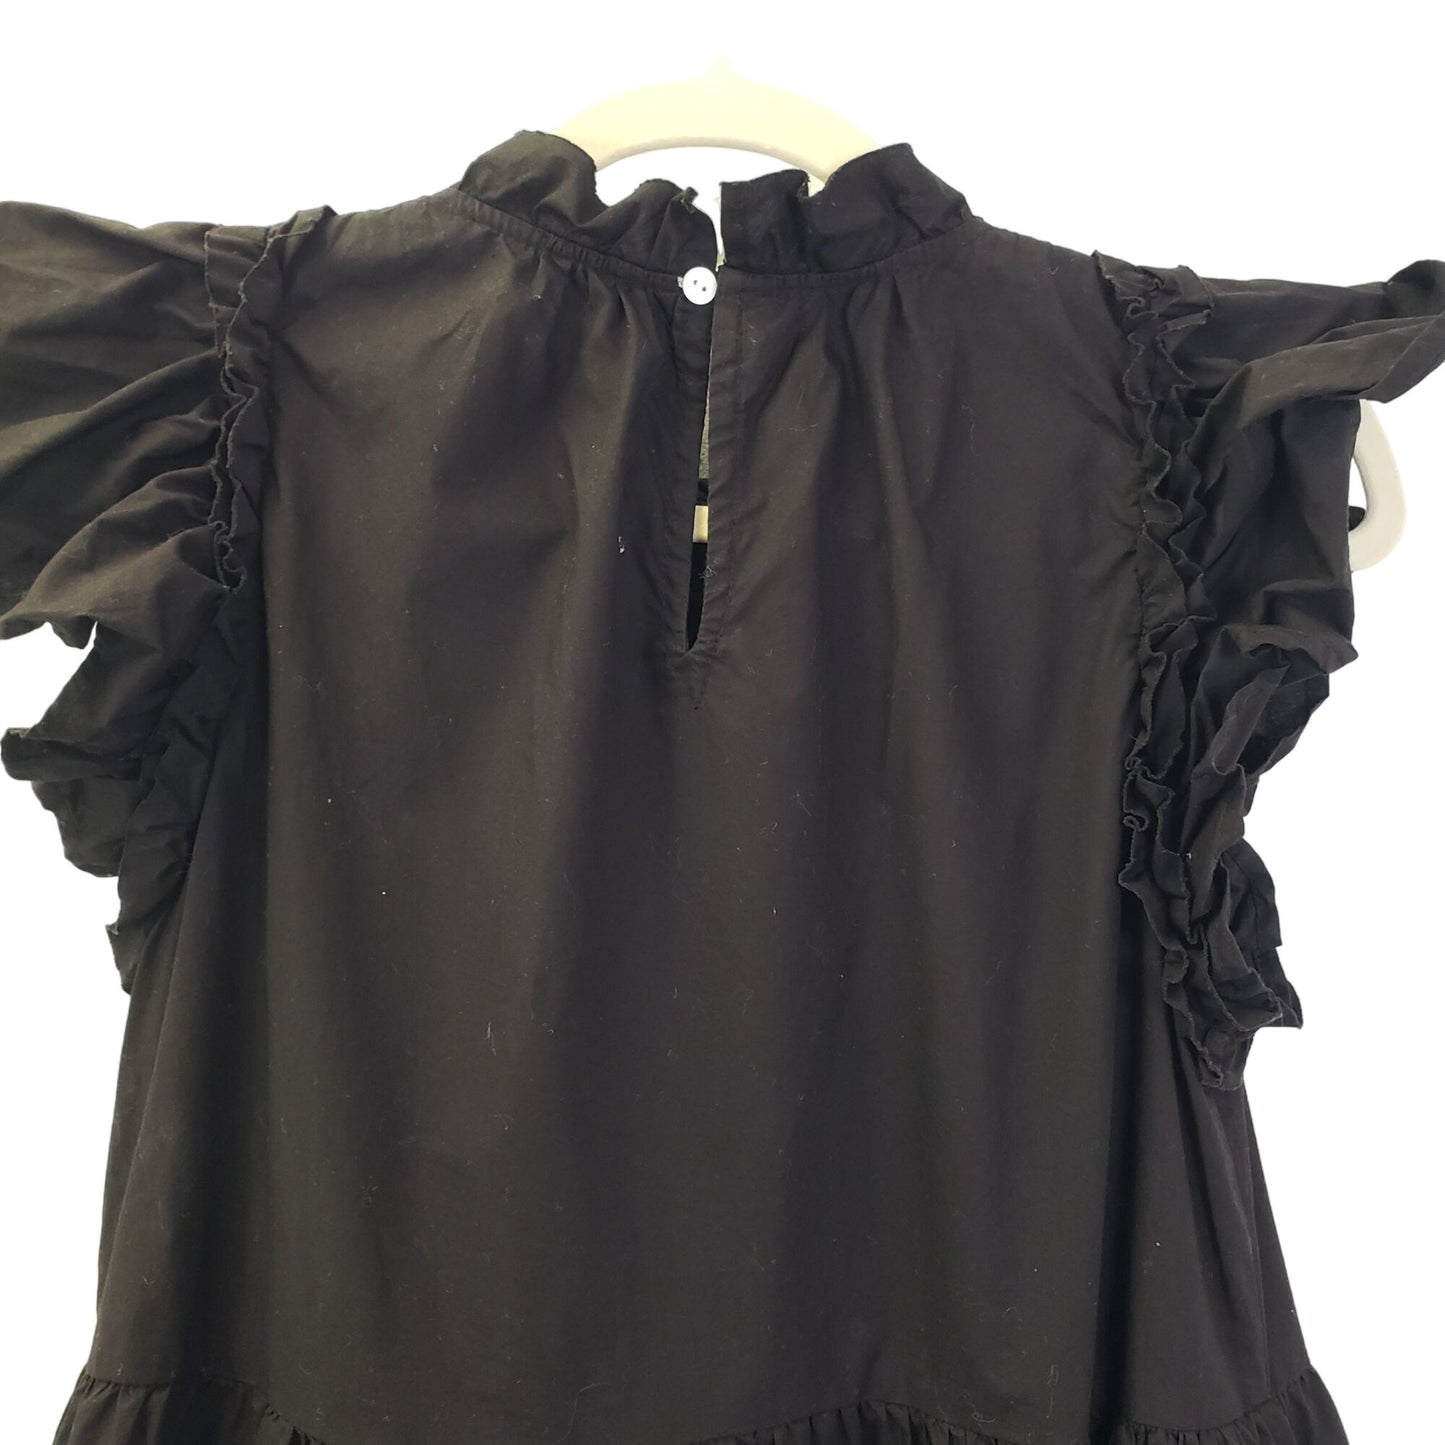 House of Harlow1960  Black Flutter Sleeve Tiered Mini Dress Size XS/S